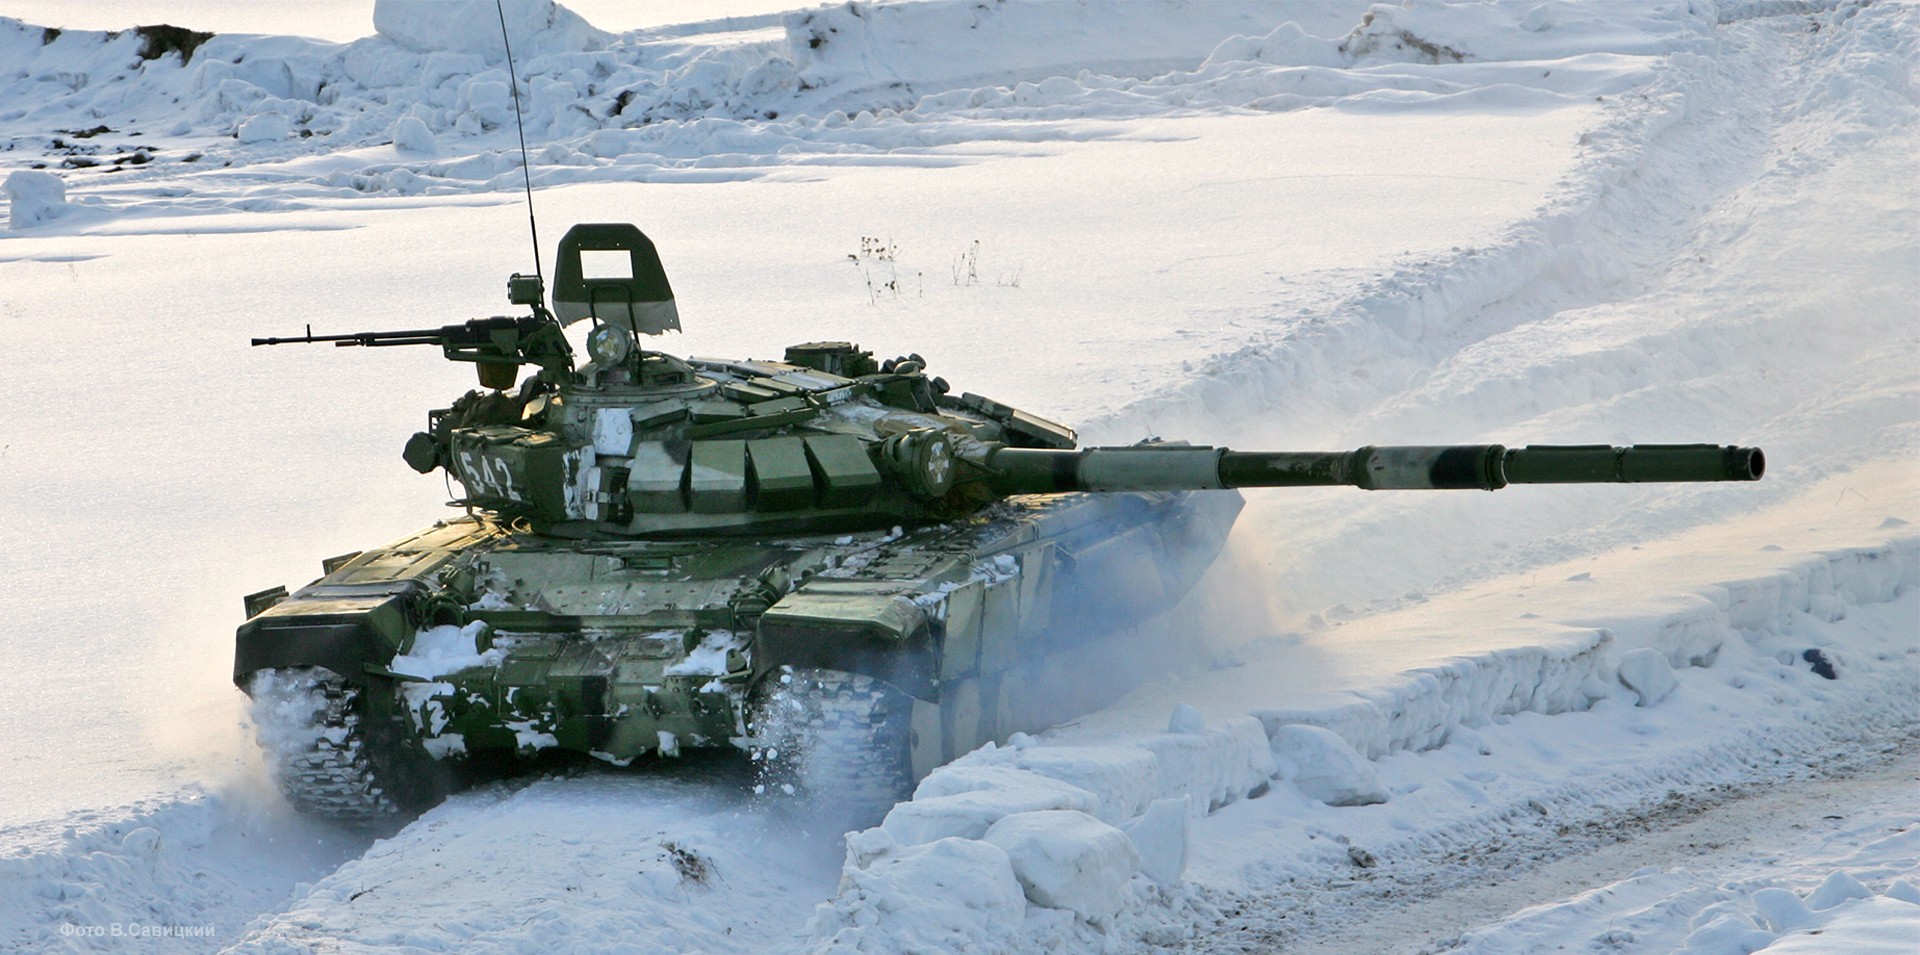 General 1920x955 military tank Russian Army T-90 vehicle military vehicle snow